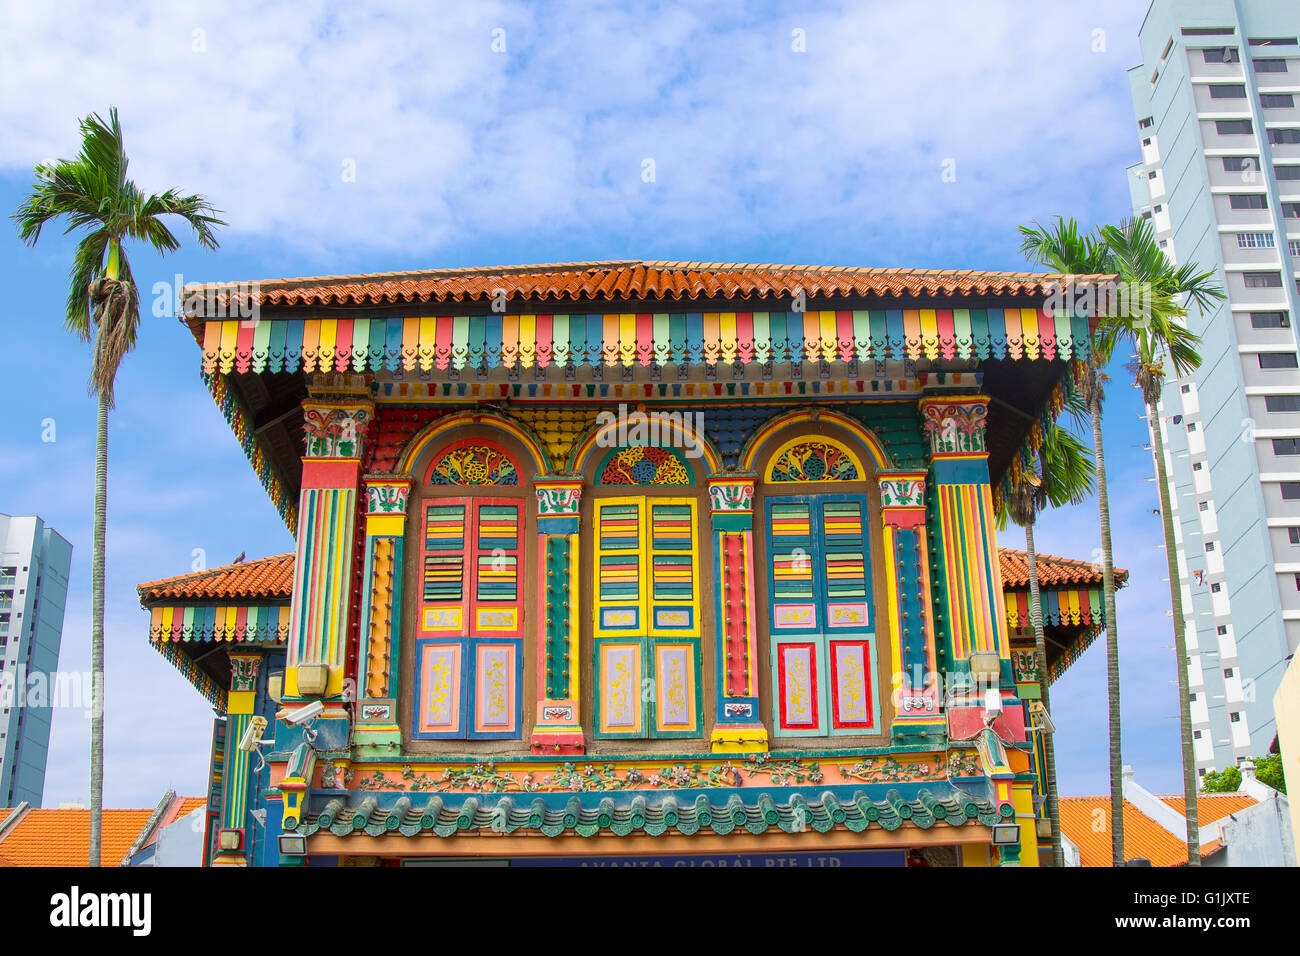 The historic villa of Tan Teng Niah, a pioneering Chinese businessman in Little India, Singapore Stock Photo